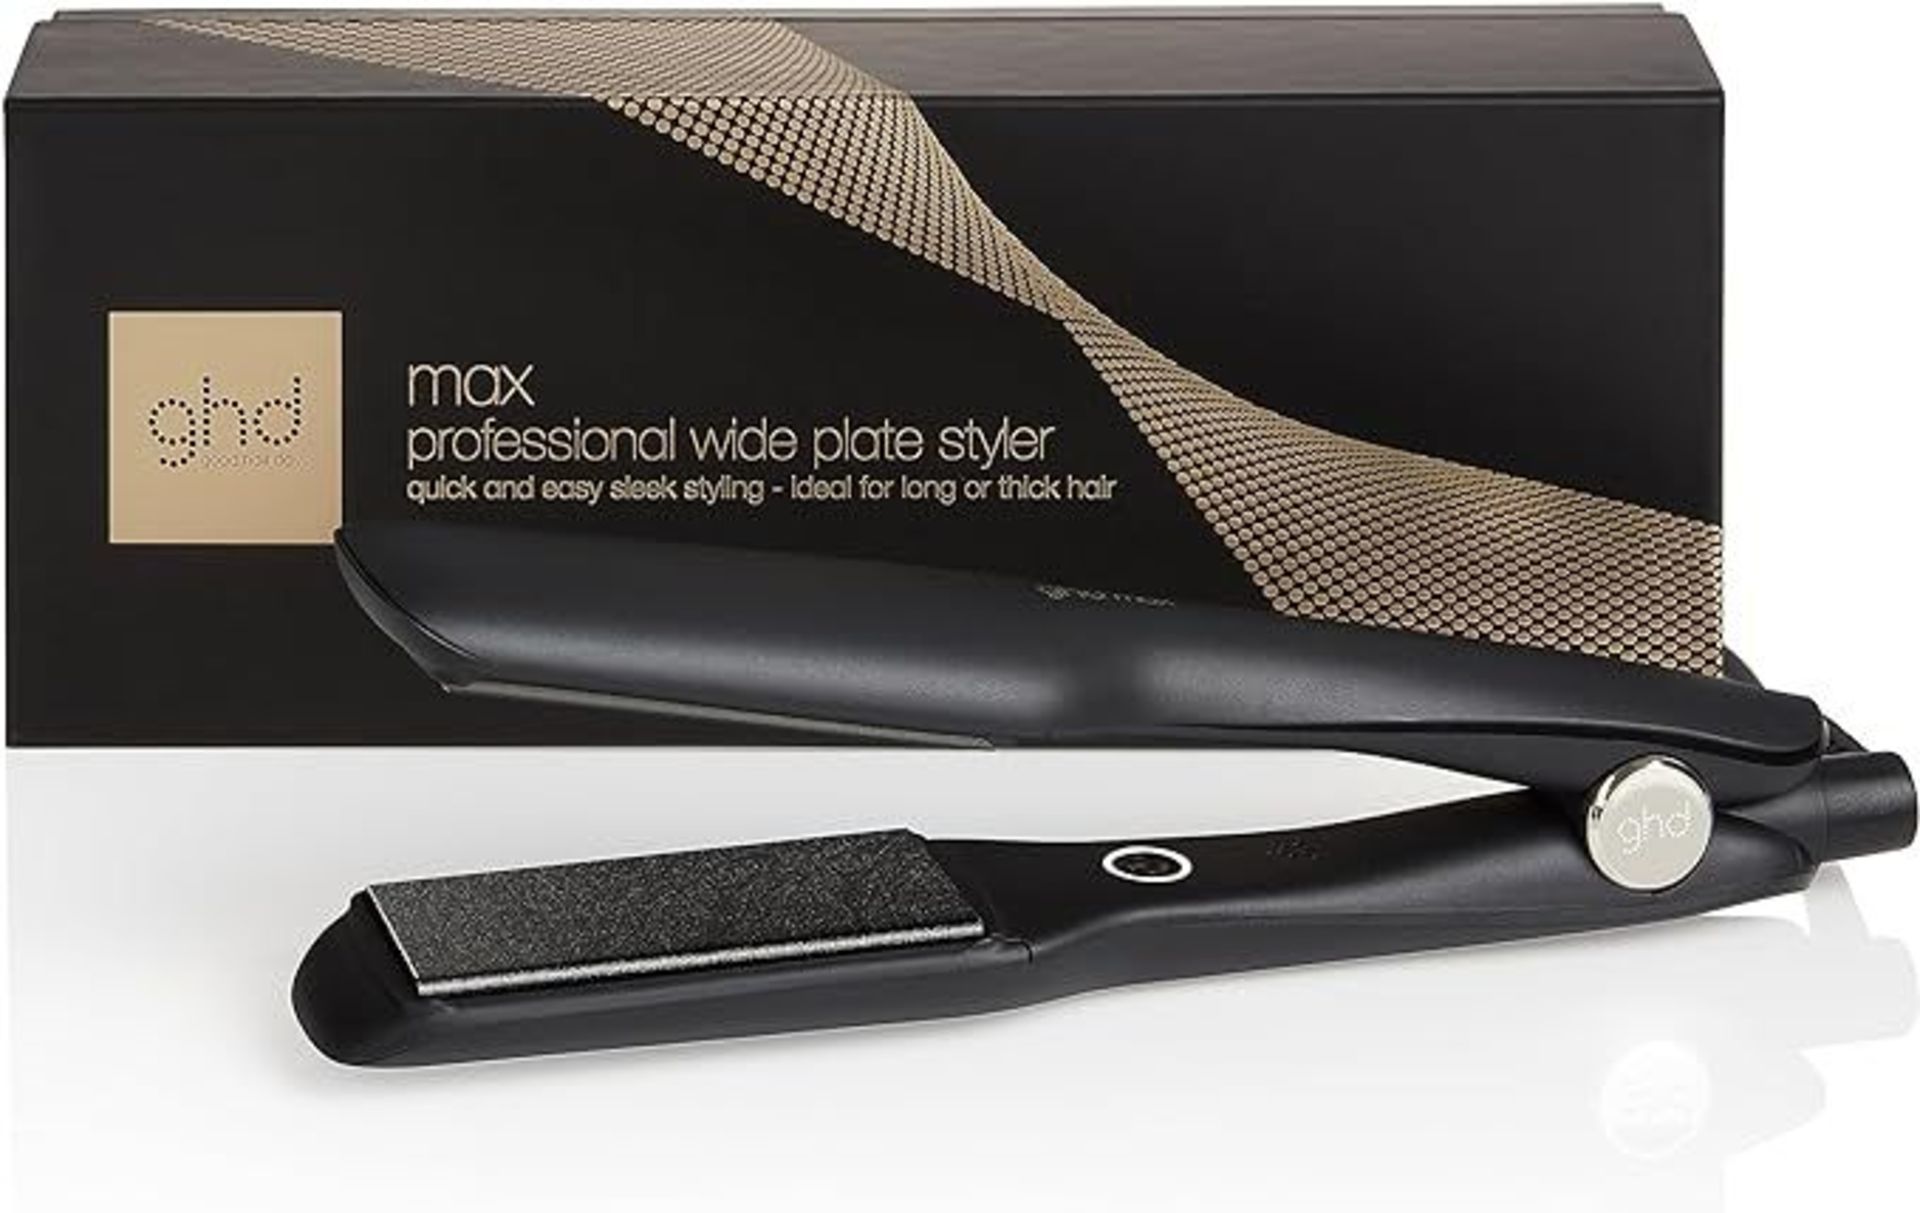 ghd Max Wide Plate Hair Straightener - 70% Larger Ceramic Plates For Smooth Sleek Results, Ideal For